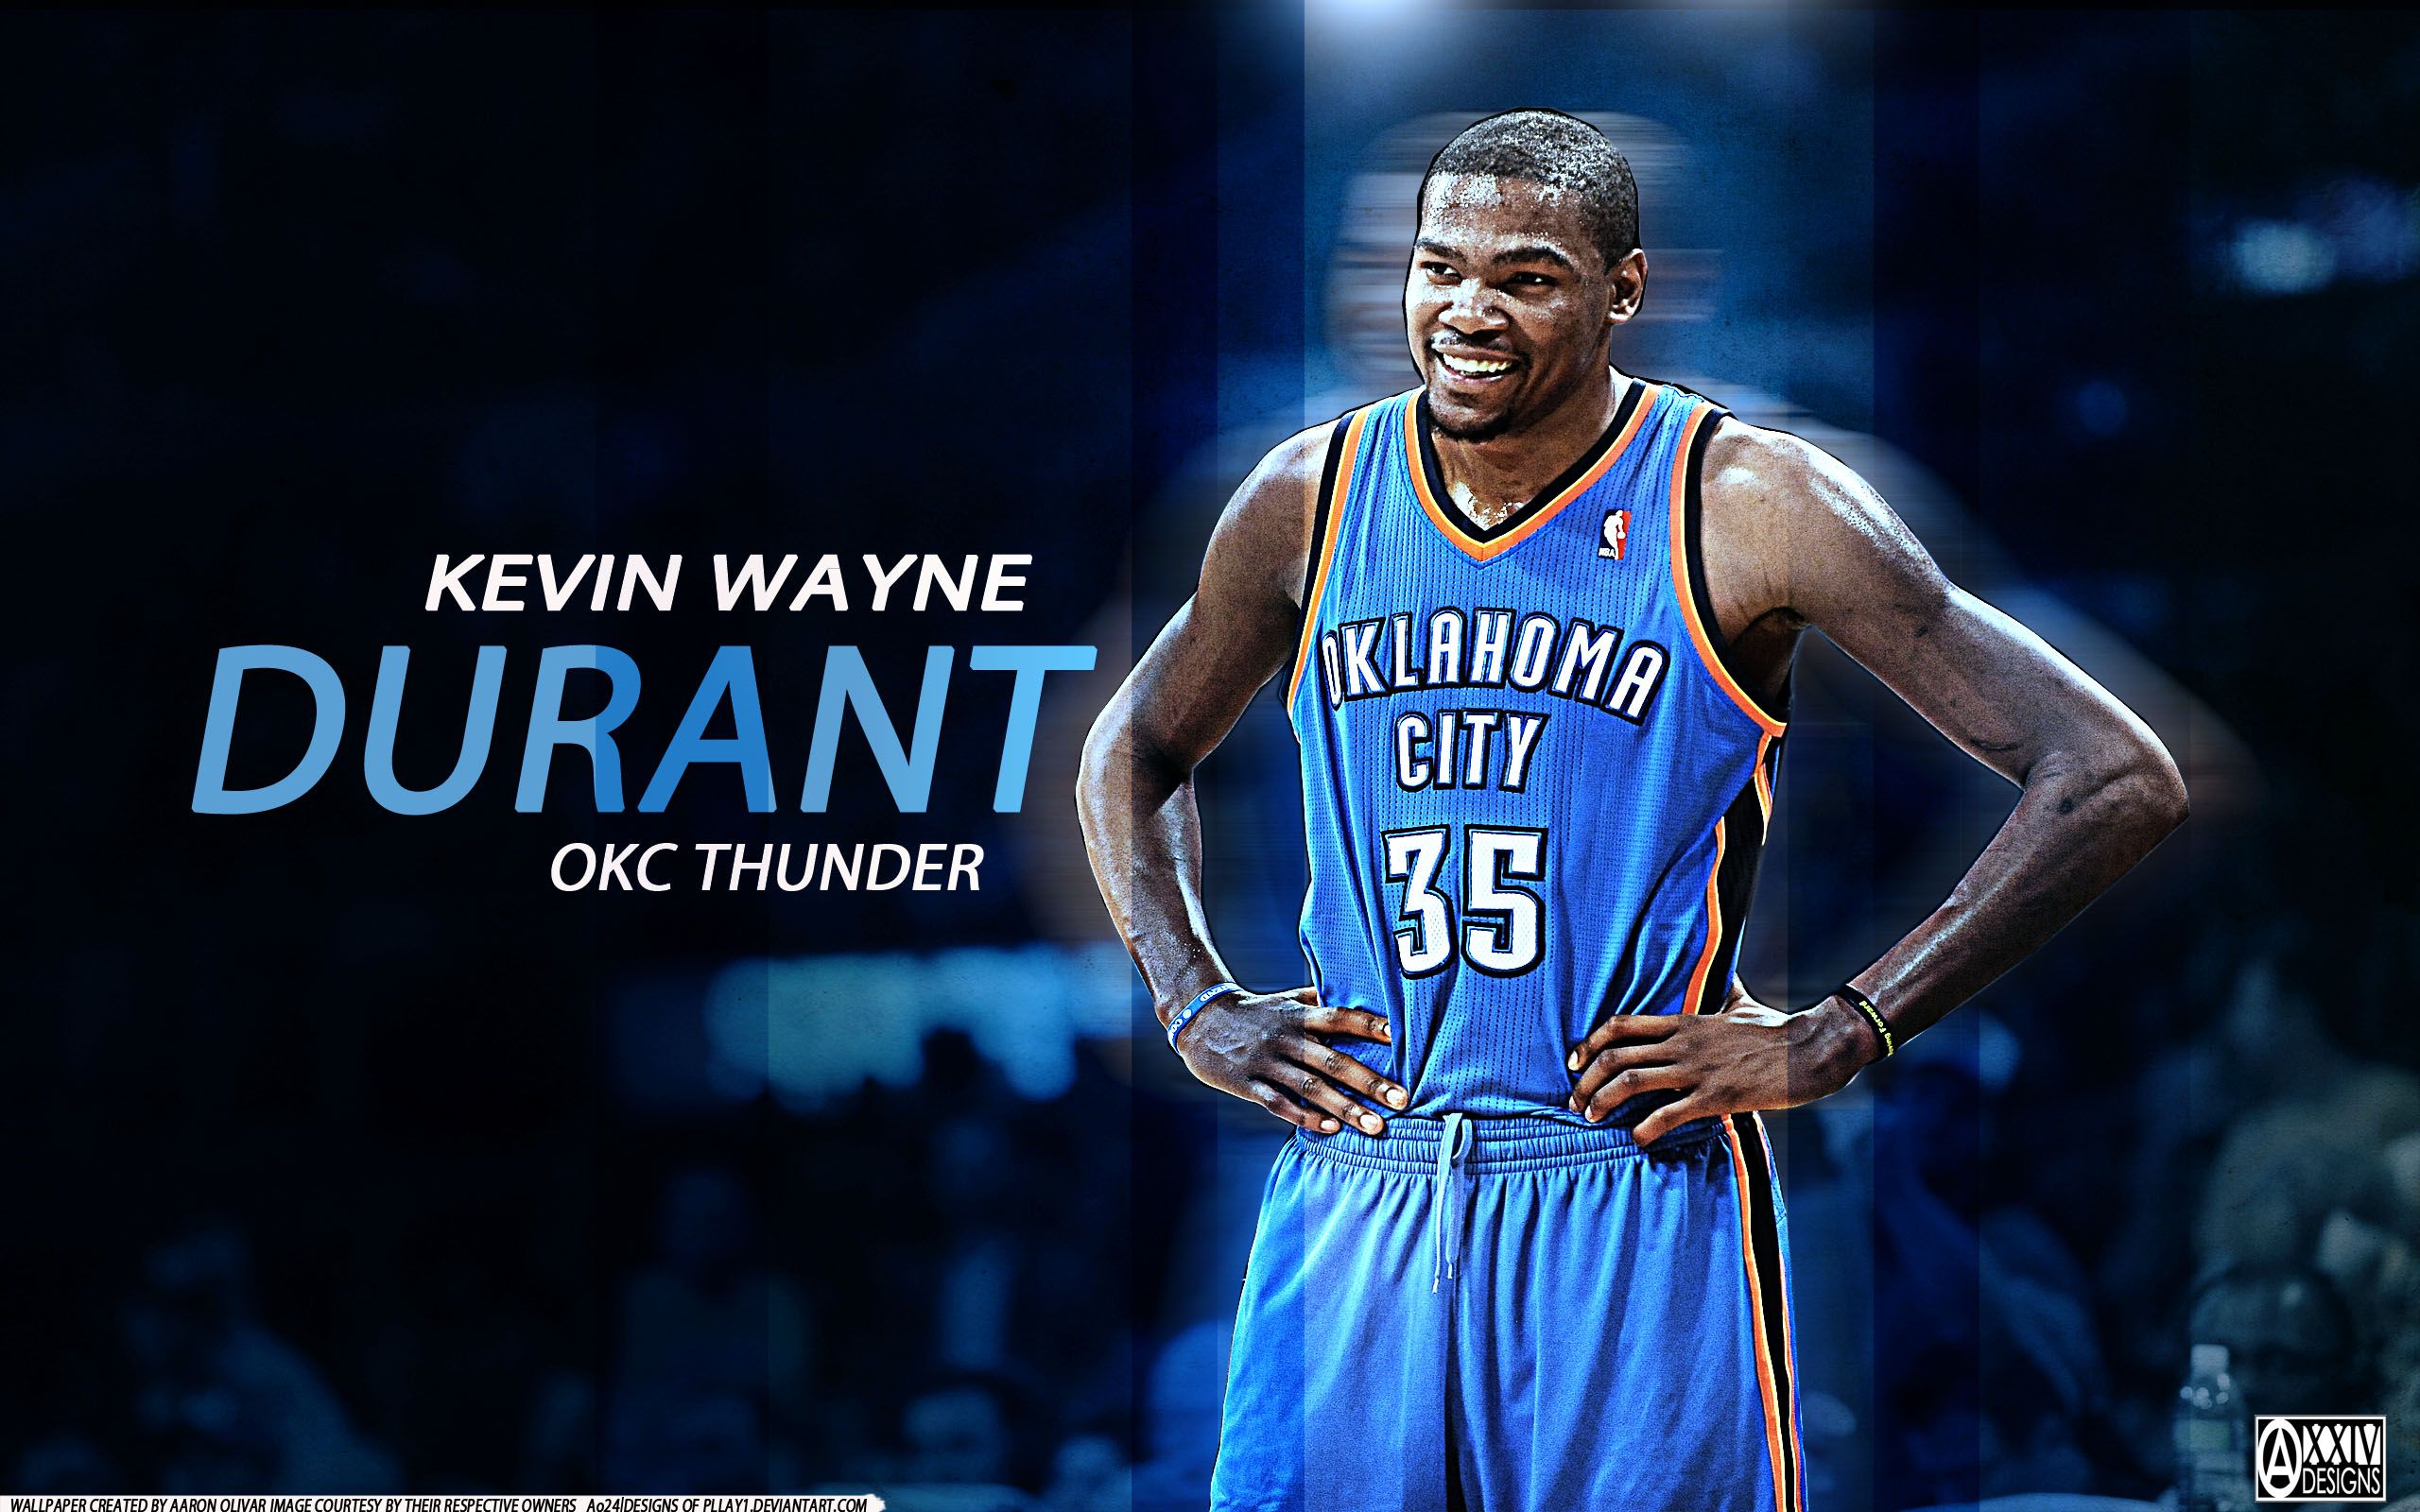 Russell Westbrook And Kevin Durant Wallpaper hd images